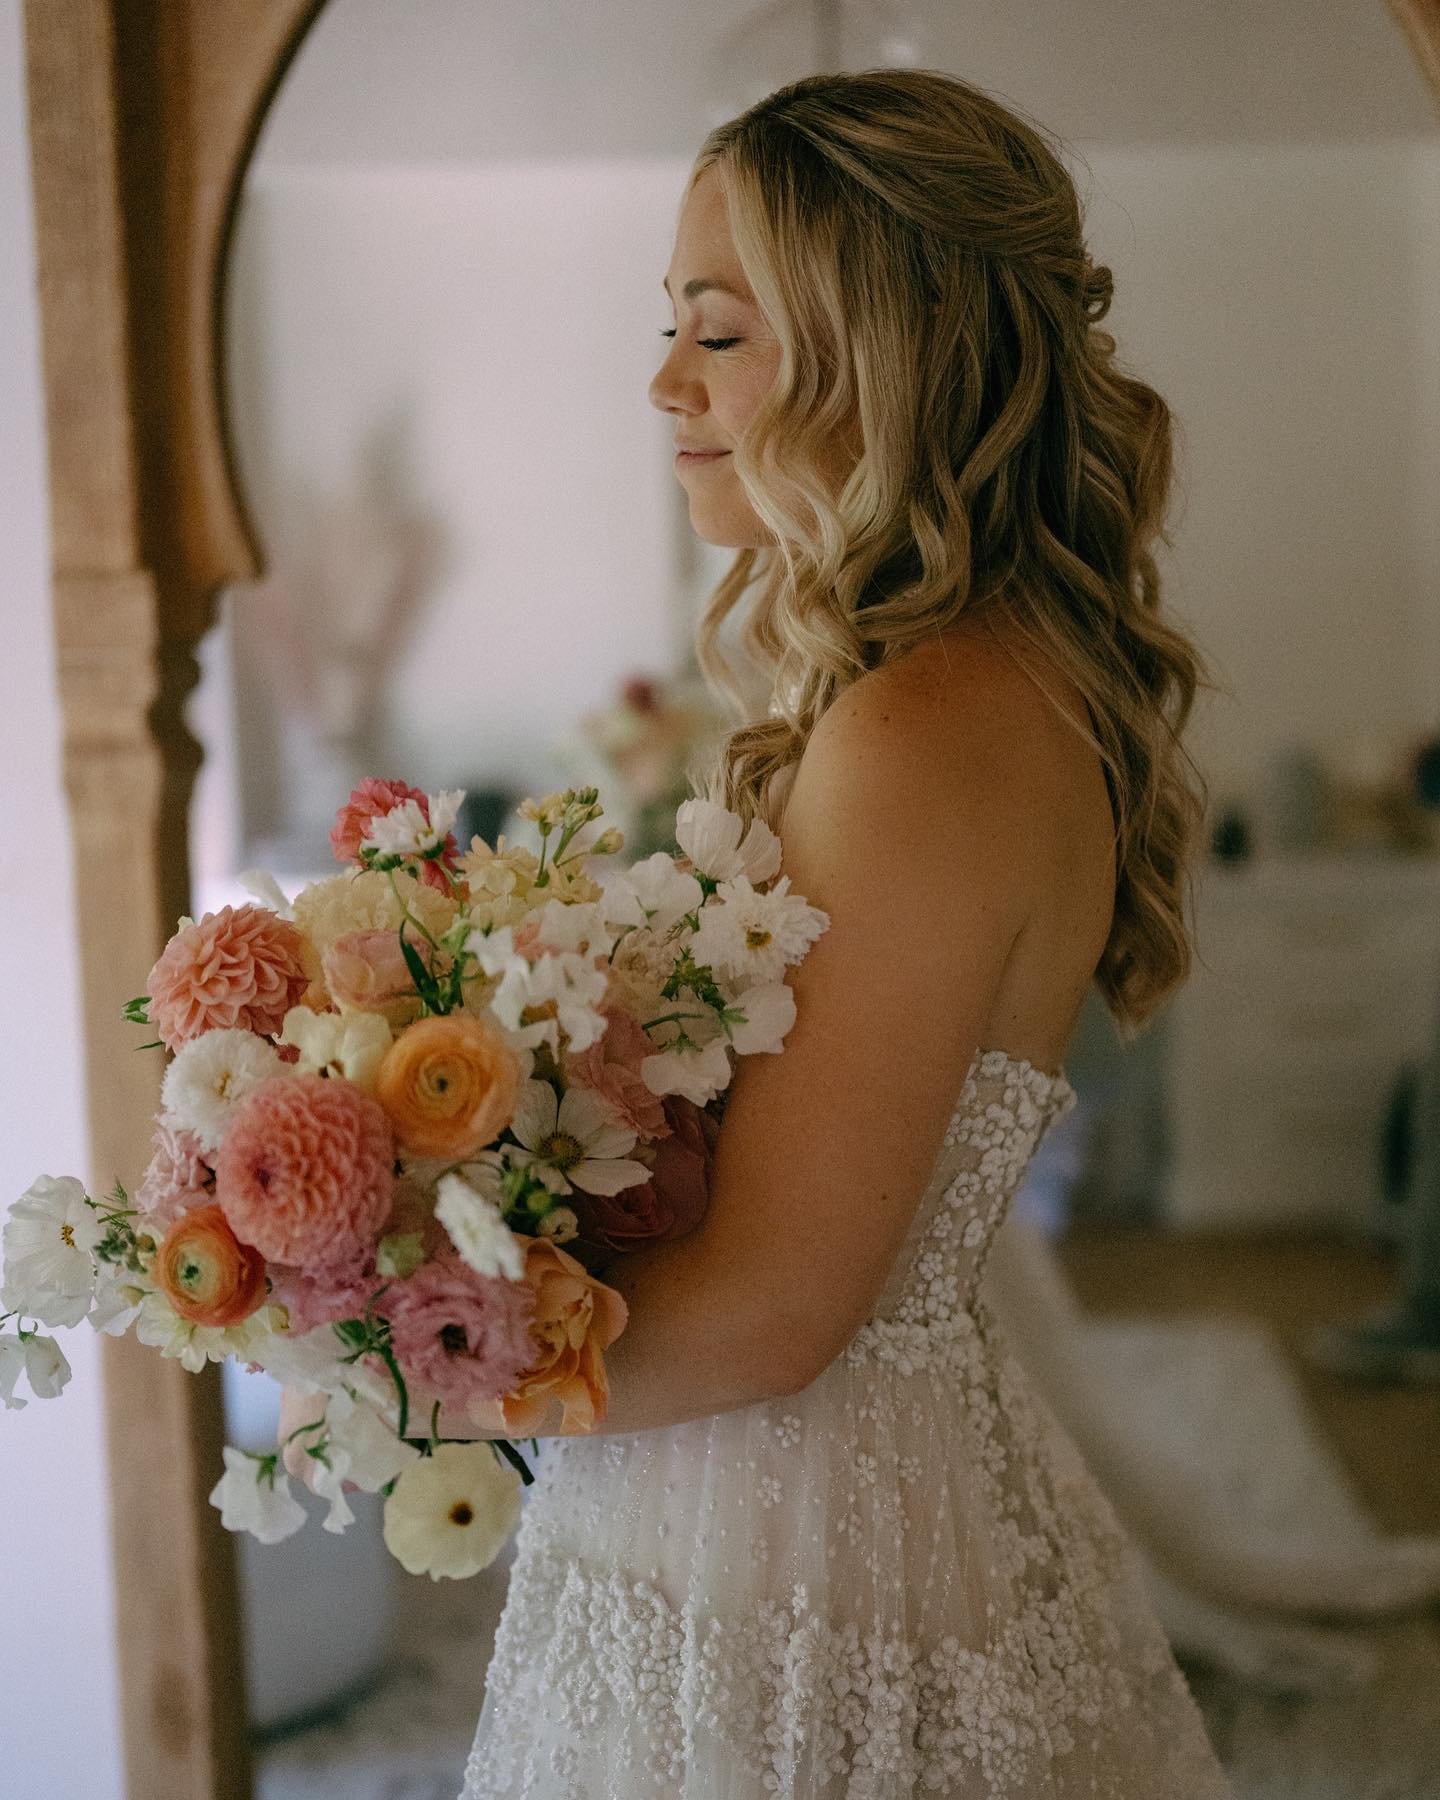 This bride + these florals 🤍